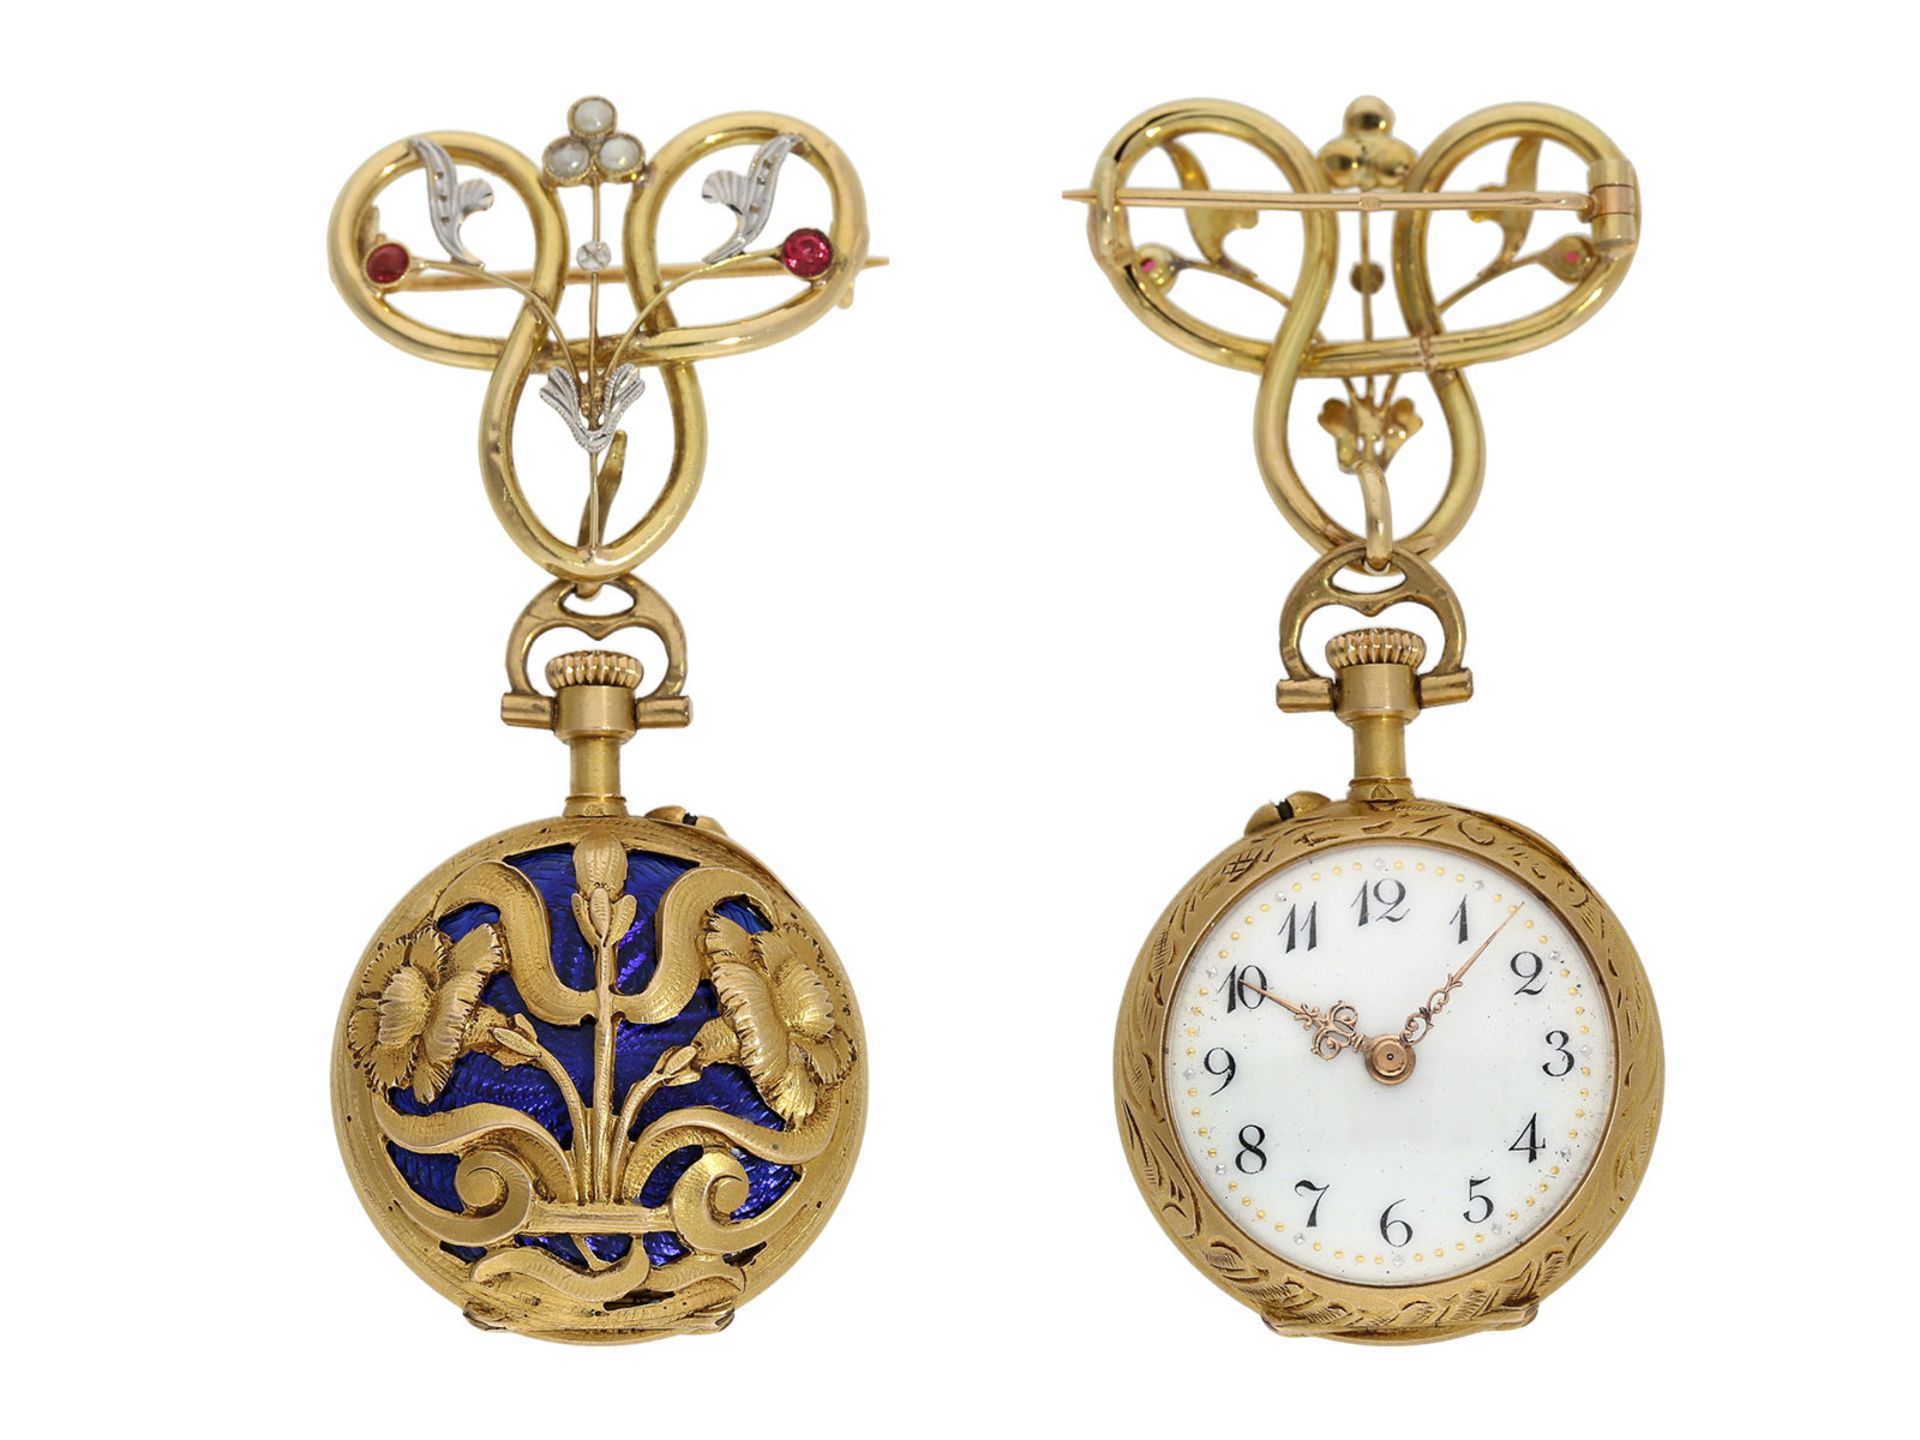 Pendant watch/ brooch: extremely beautiful Le Coultre gold/ enamel Art Nouveau lady's watch with